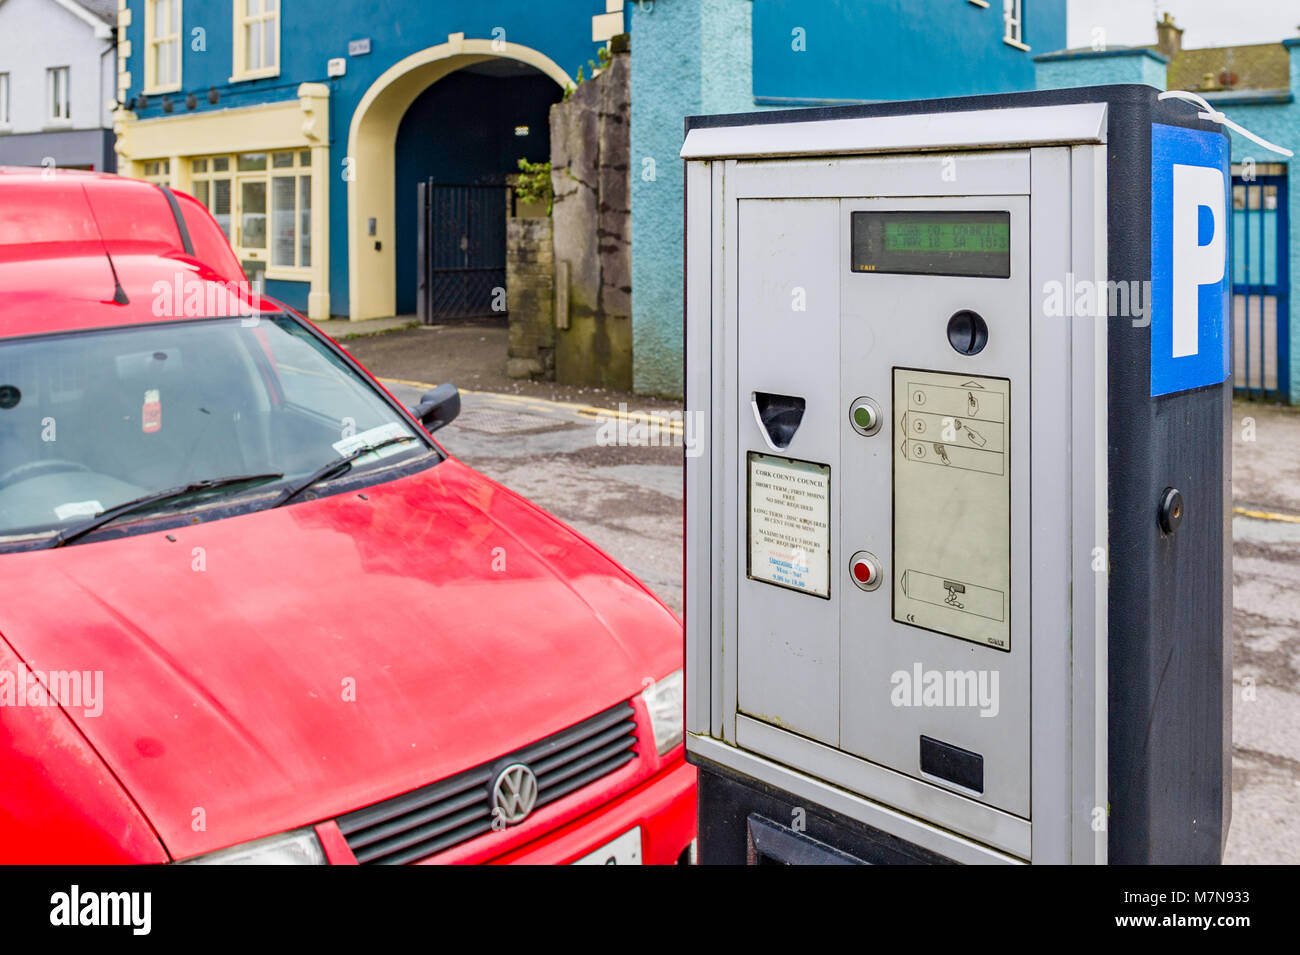 Red VW van parked in the street next to a coin operated parking meter in Bandon, County Cork, Ireland. Stock Photo